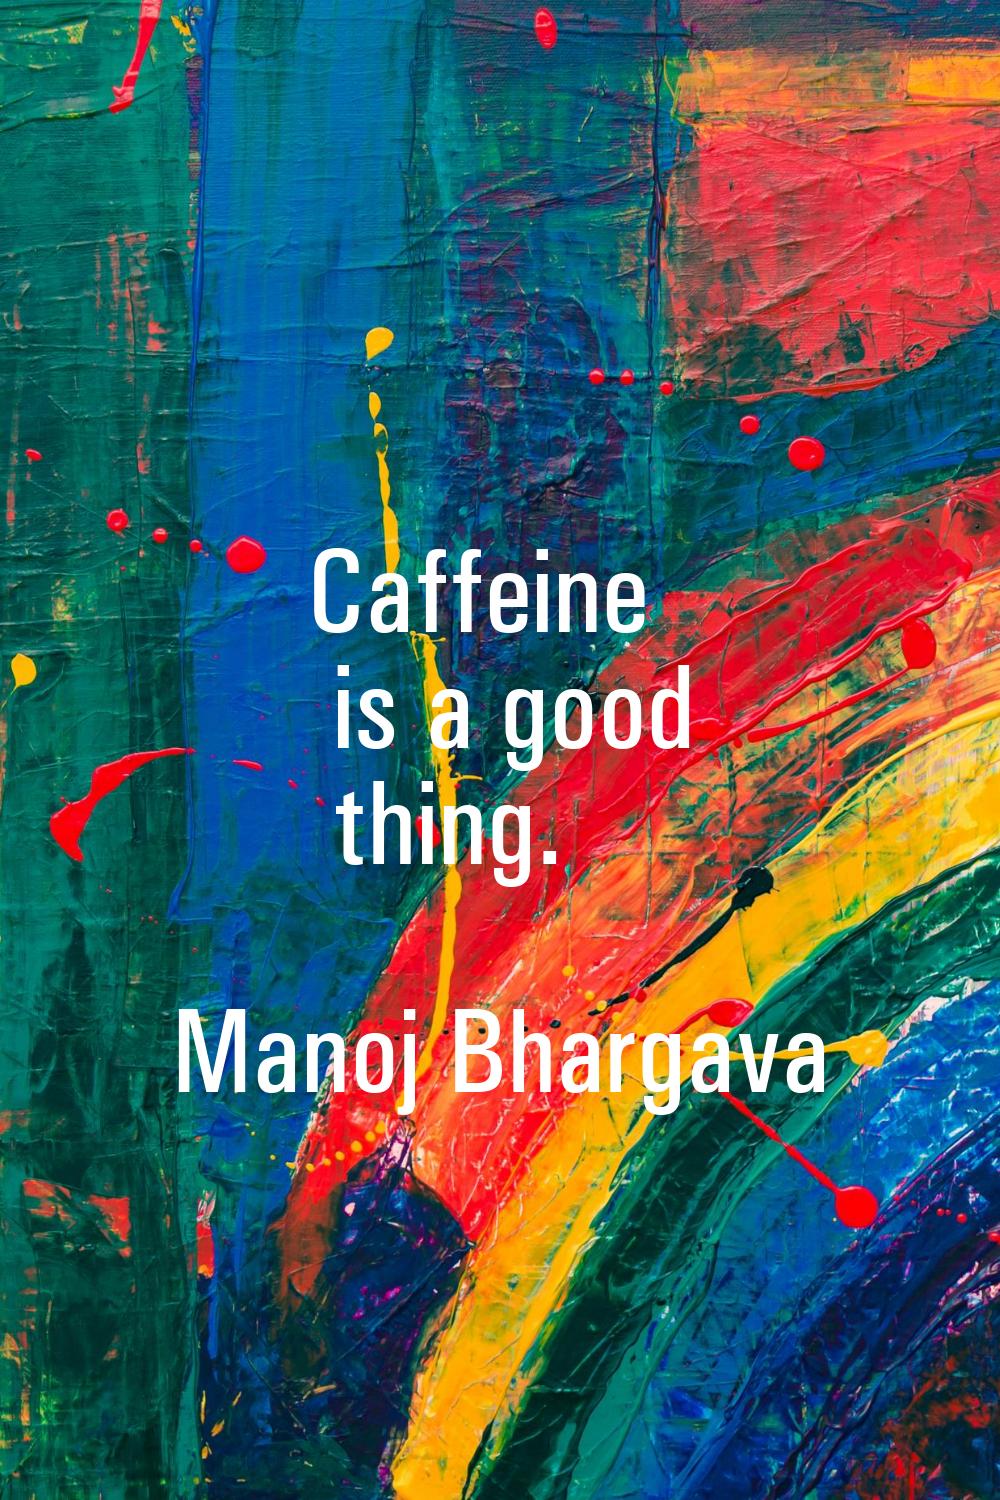 Caffeine is a good thing.